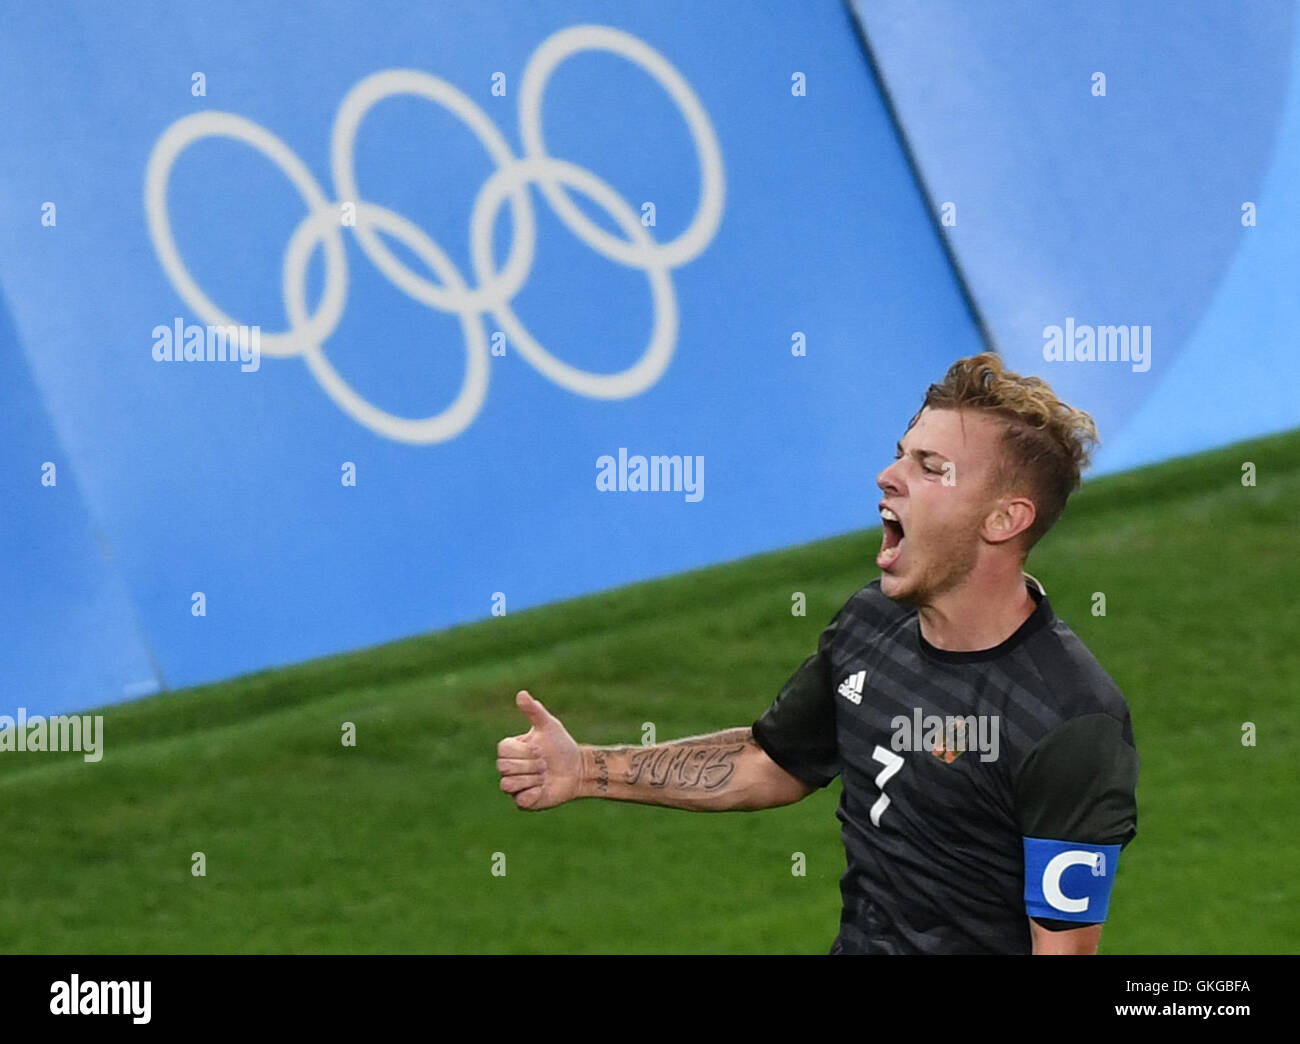 Rio de Janeiro, Brazil. 20th Aug, 2016. Maximilian Meyer of Germany celebrates after he scored the 1:1 during the Men's soccer Gold Medal Match between Brazil and Germany during the Rio 2016 Olympic Games at the Maracana in Rio de Janeiro, Brazil, 20 August 2016. Photo: Sebastian Kahnert/dpa/Alamy Live News Stock Photo